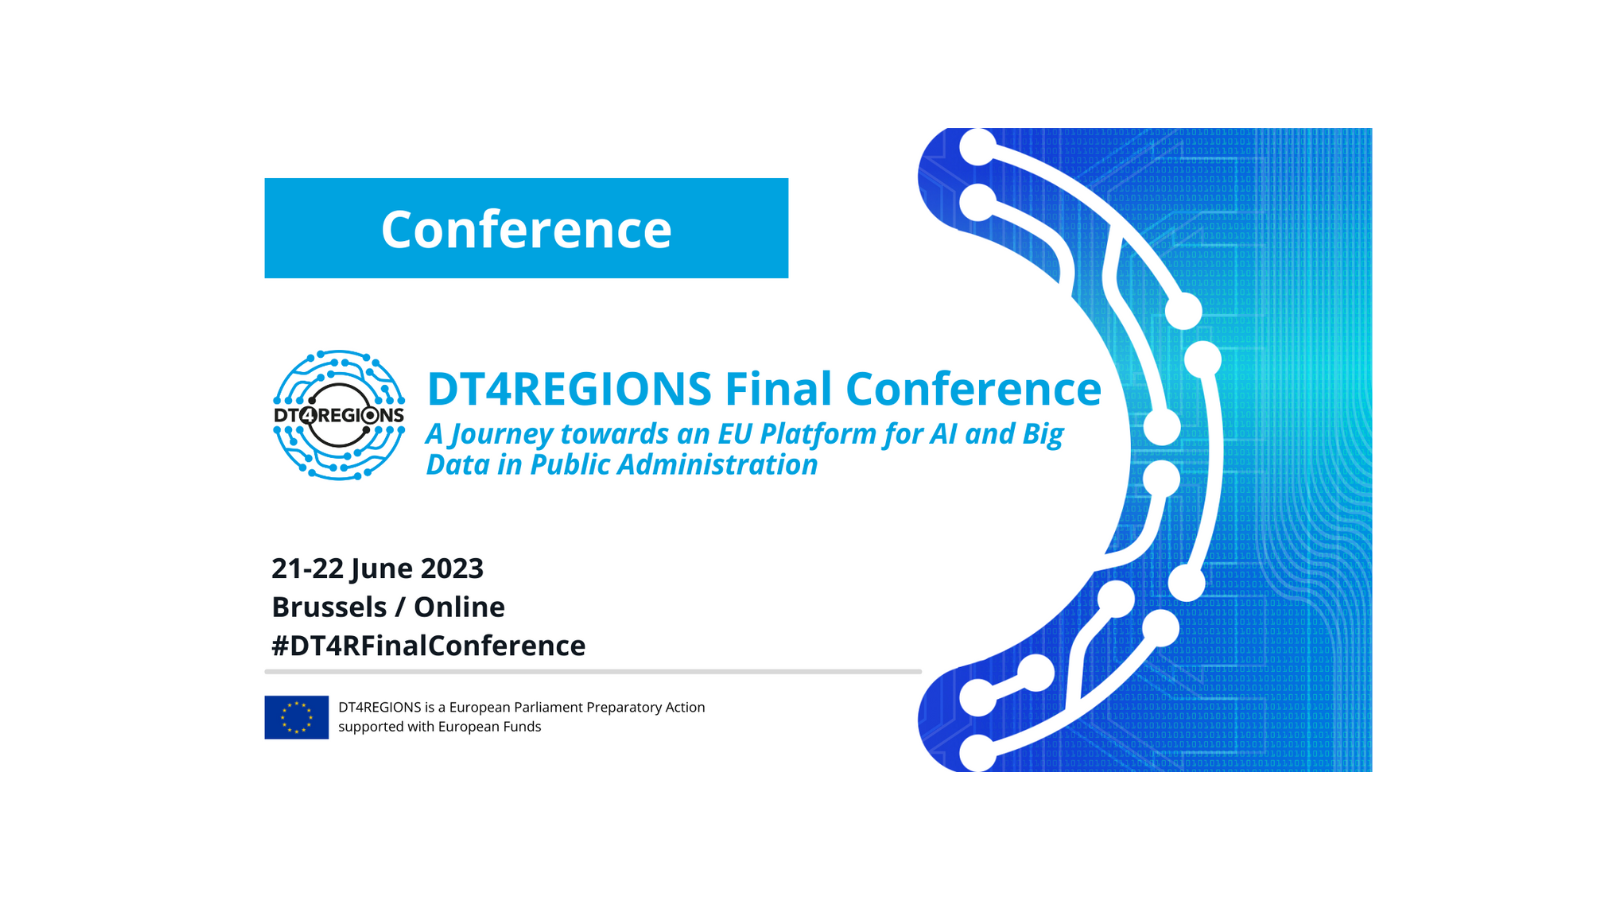 DT4REGIONS Final Conference